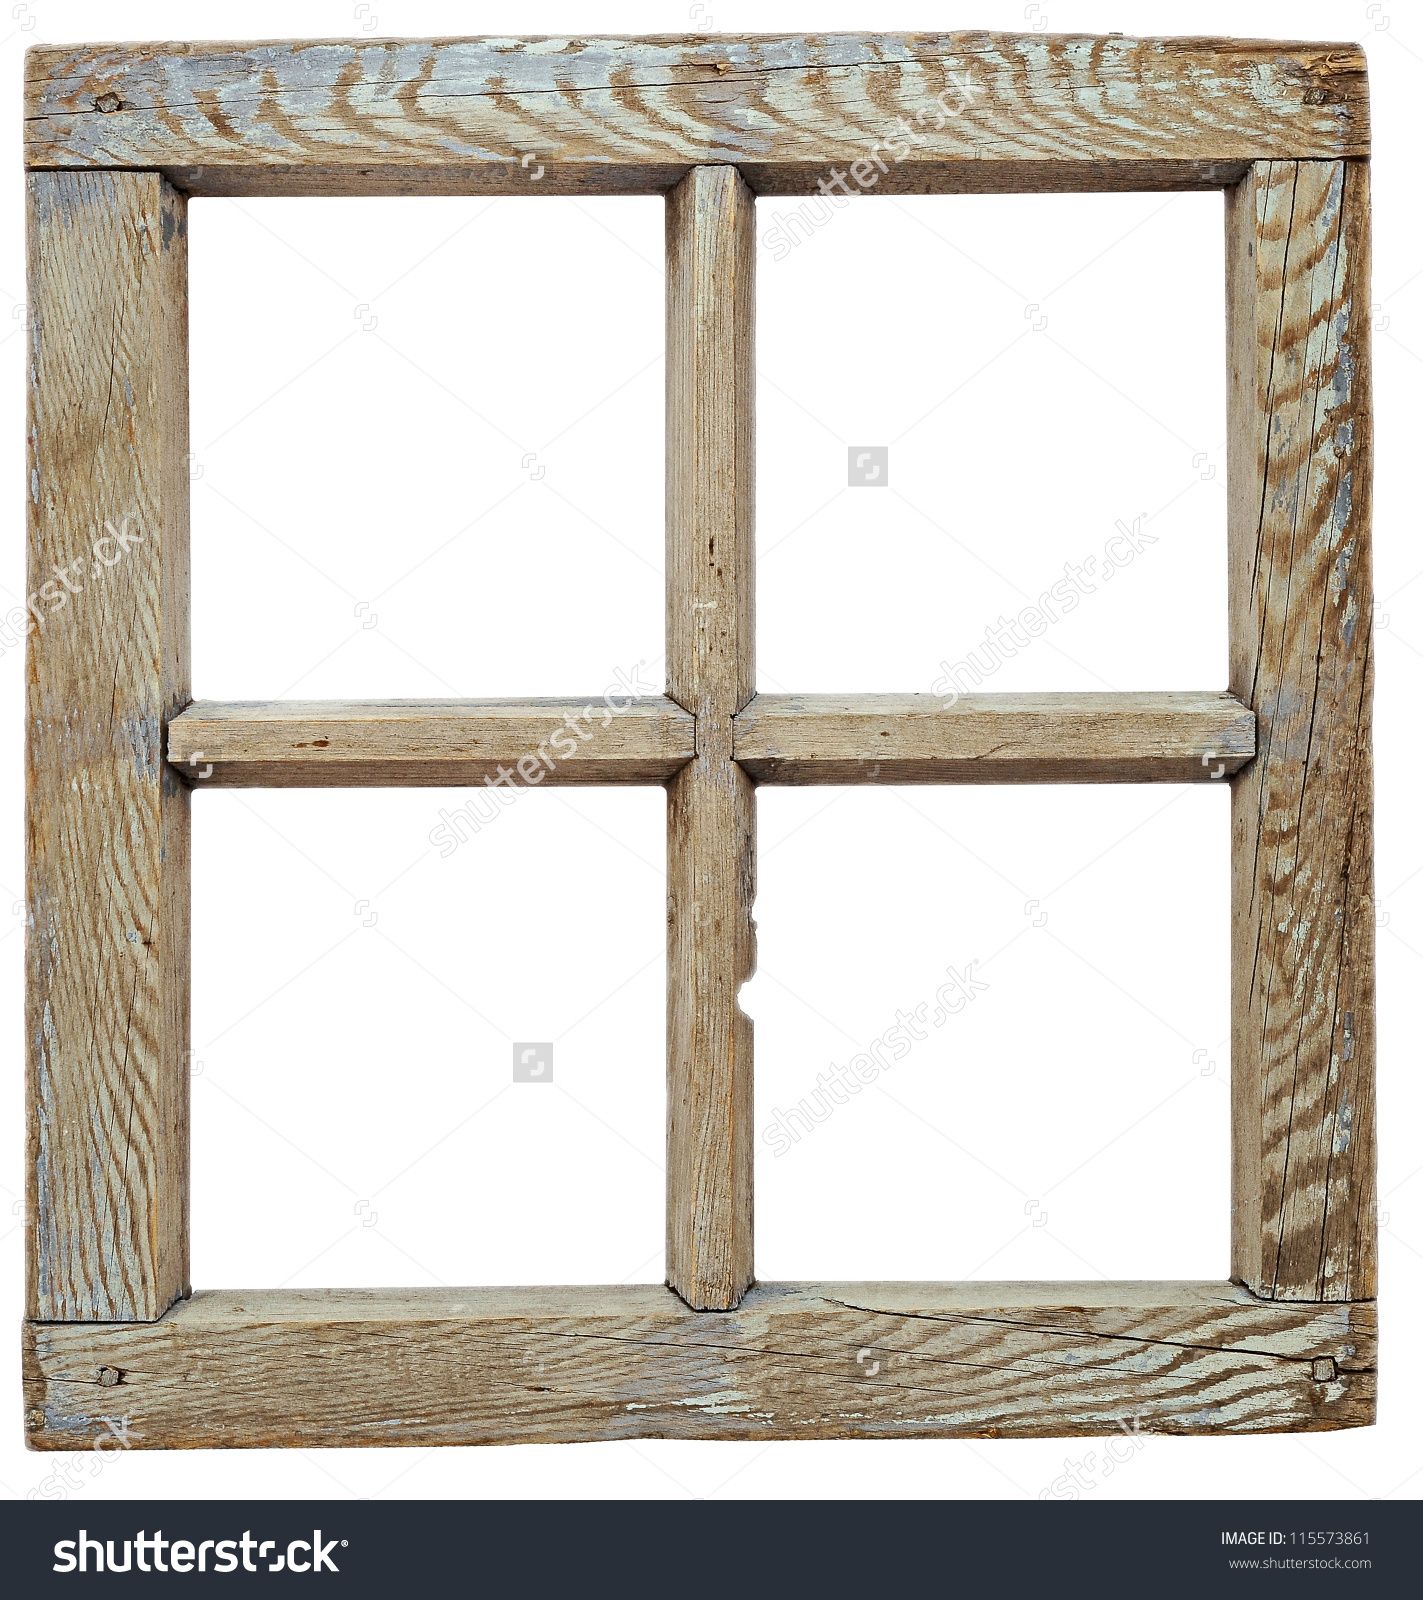 Old Wooden Window Frames With Best Ways To Use Windows As In Old Rustic Barn Window Frame (View 7 of 30)